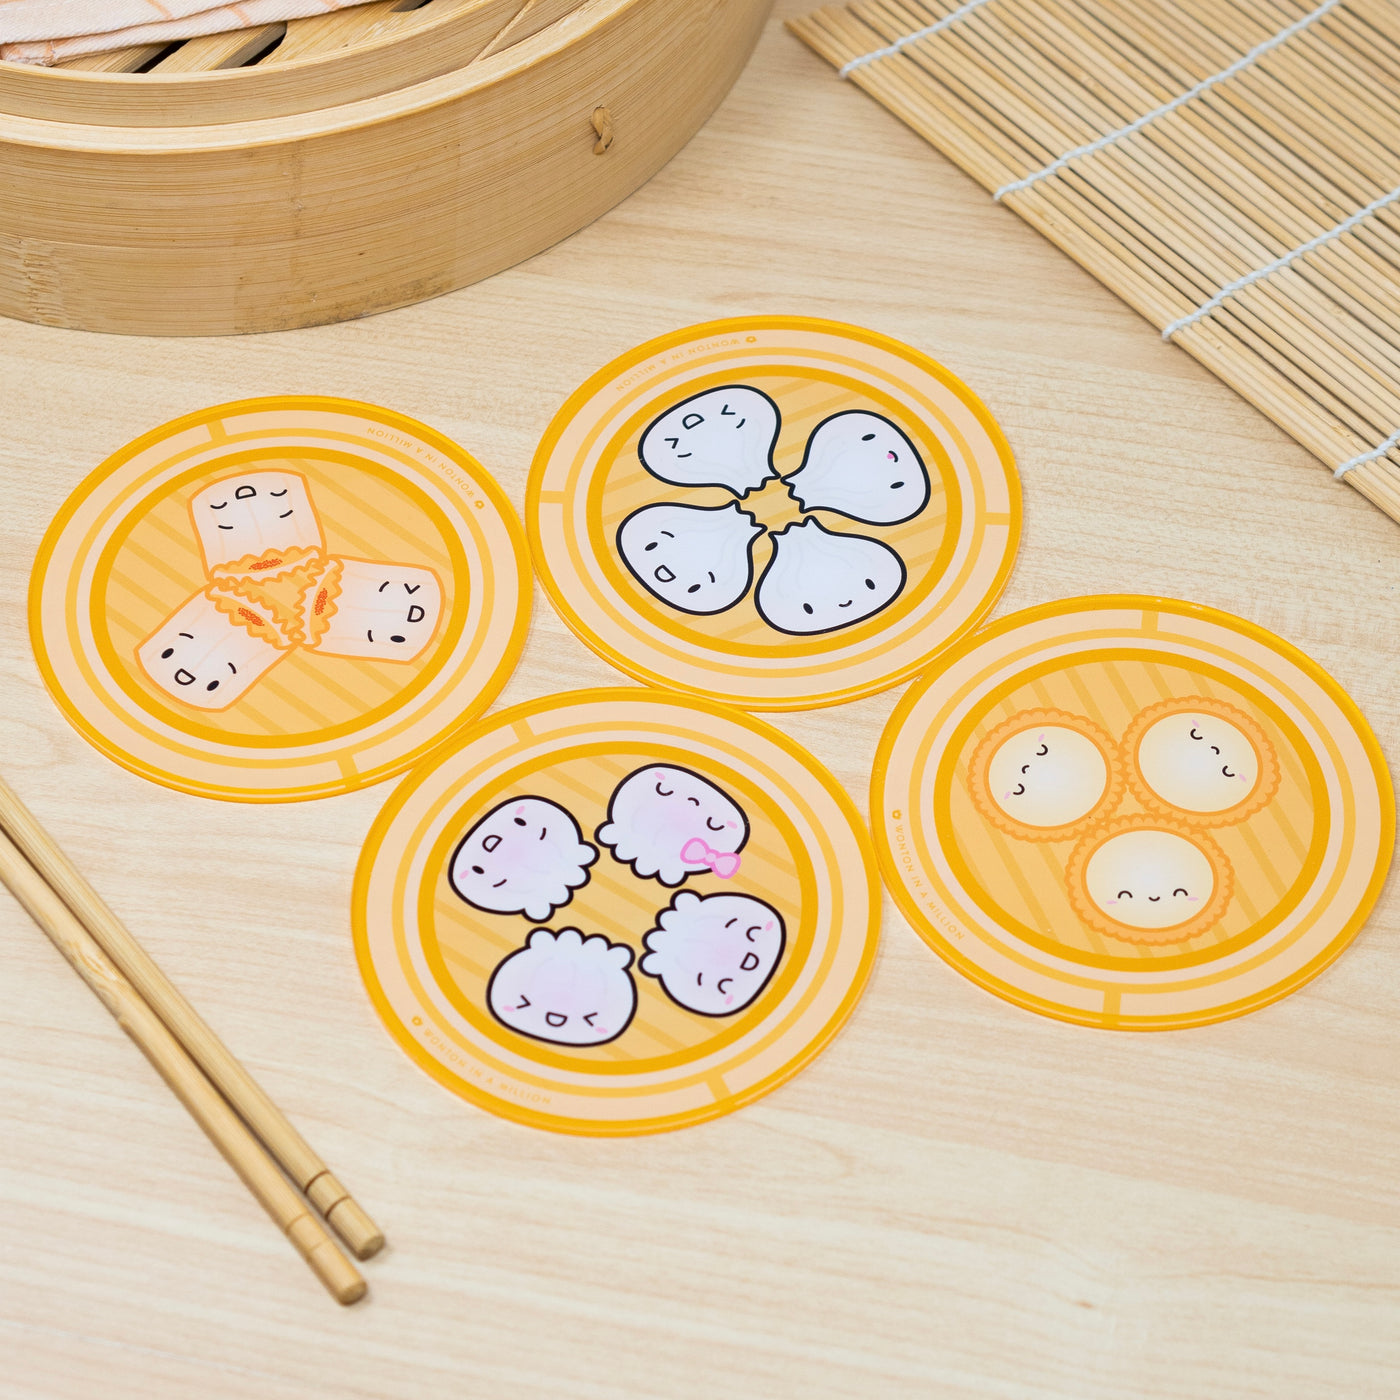 Year Of The Rabbit - [DAY 10] Acrylic Dimsum Steamer Coasters (Set of 4)